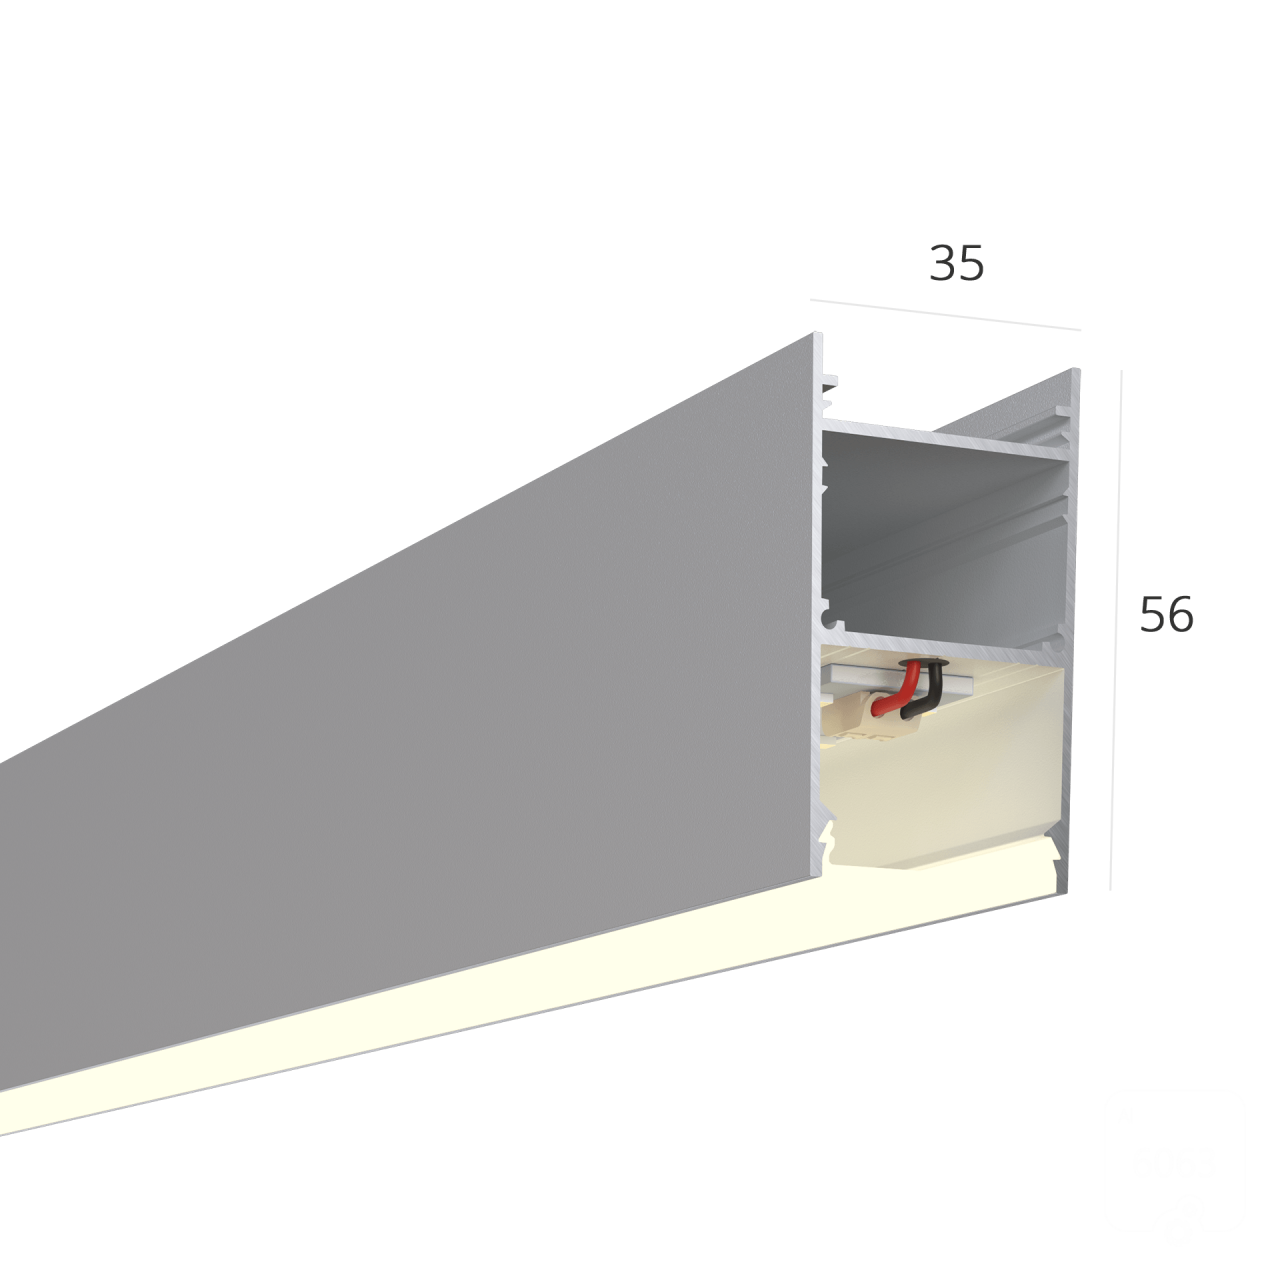 Dimensions 35x56mm.
Available in black, silver.
Chic anodized aluminum profile for making linear luminaires (pendant/overhead) with built-in power supply!